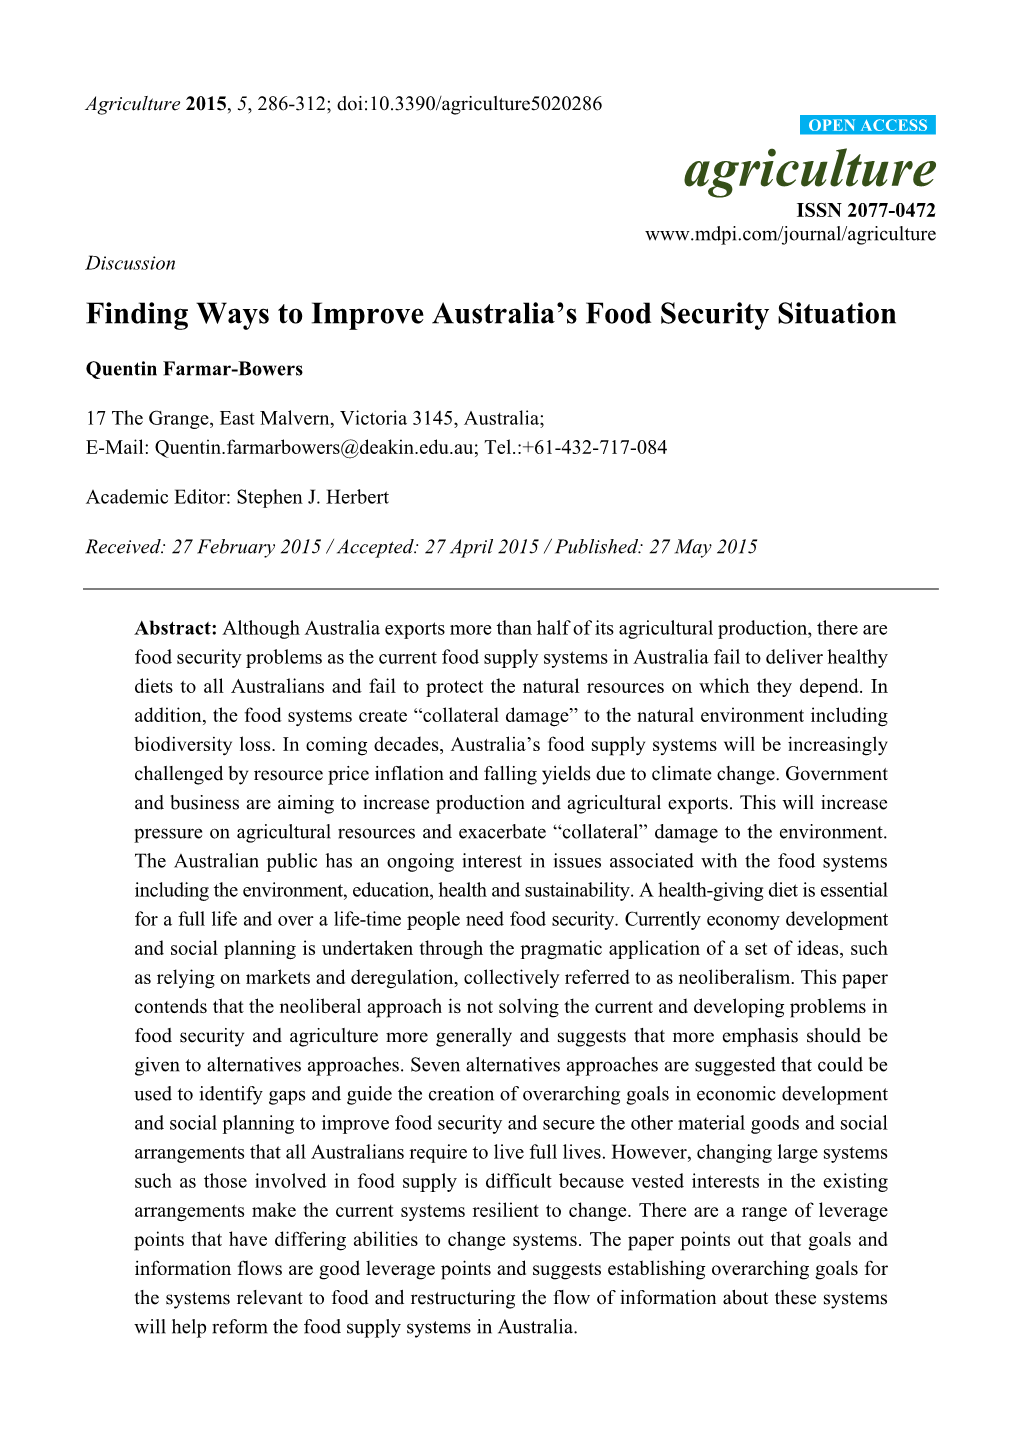 Finding Ways to Improve Australia's Food Security Situation